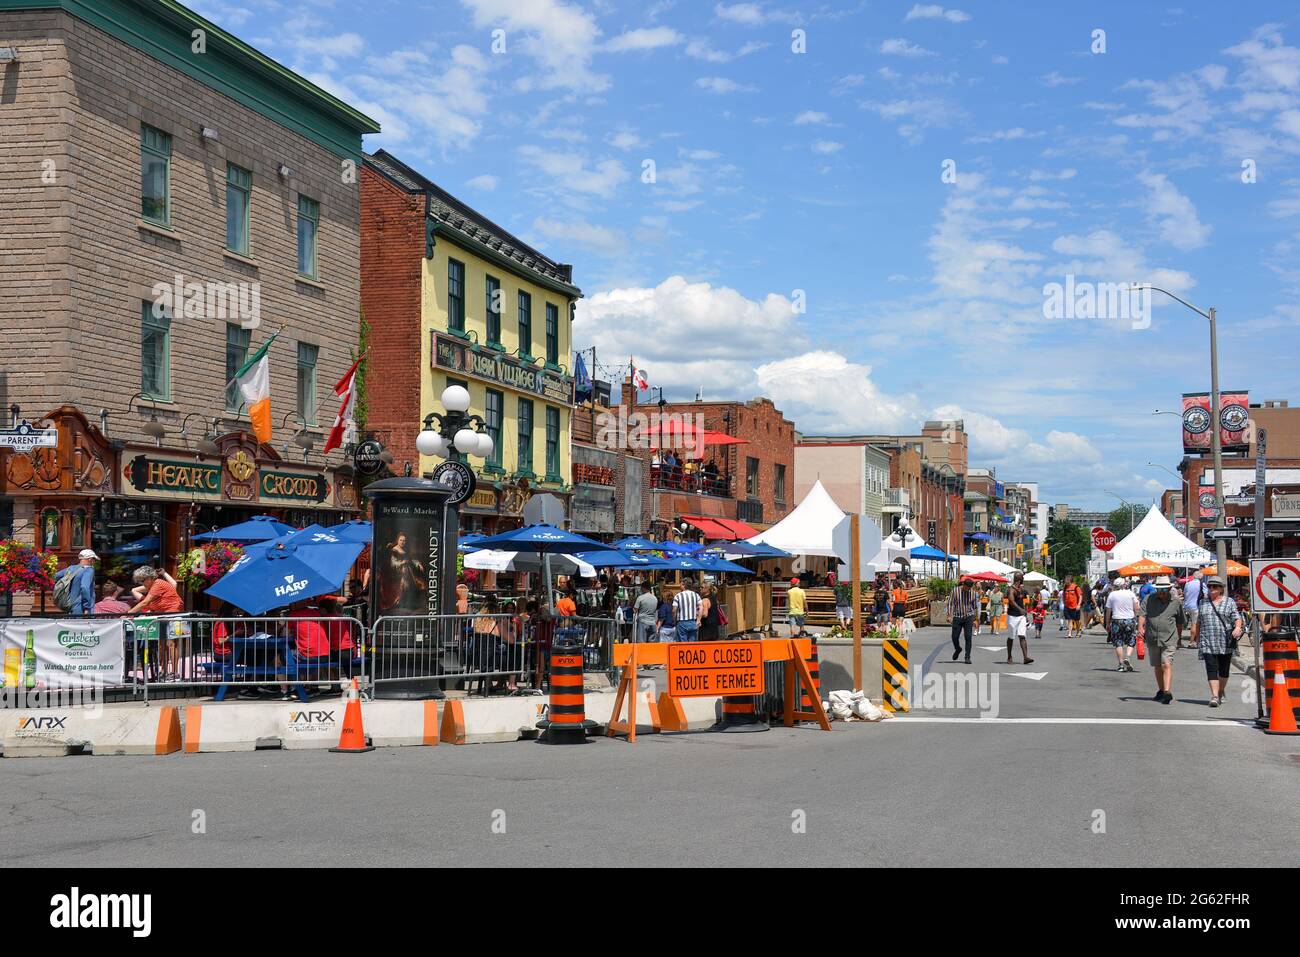 Ottawa, Canada - July 1, 2021: Clarence Street was busy on Canada Day with people confined to patio dining only due to the Covid-19 restrictions. The street was closed to allow more room for the patios during the pandemic. Stock Photo